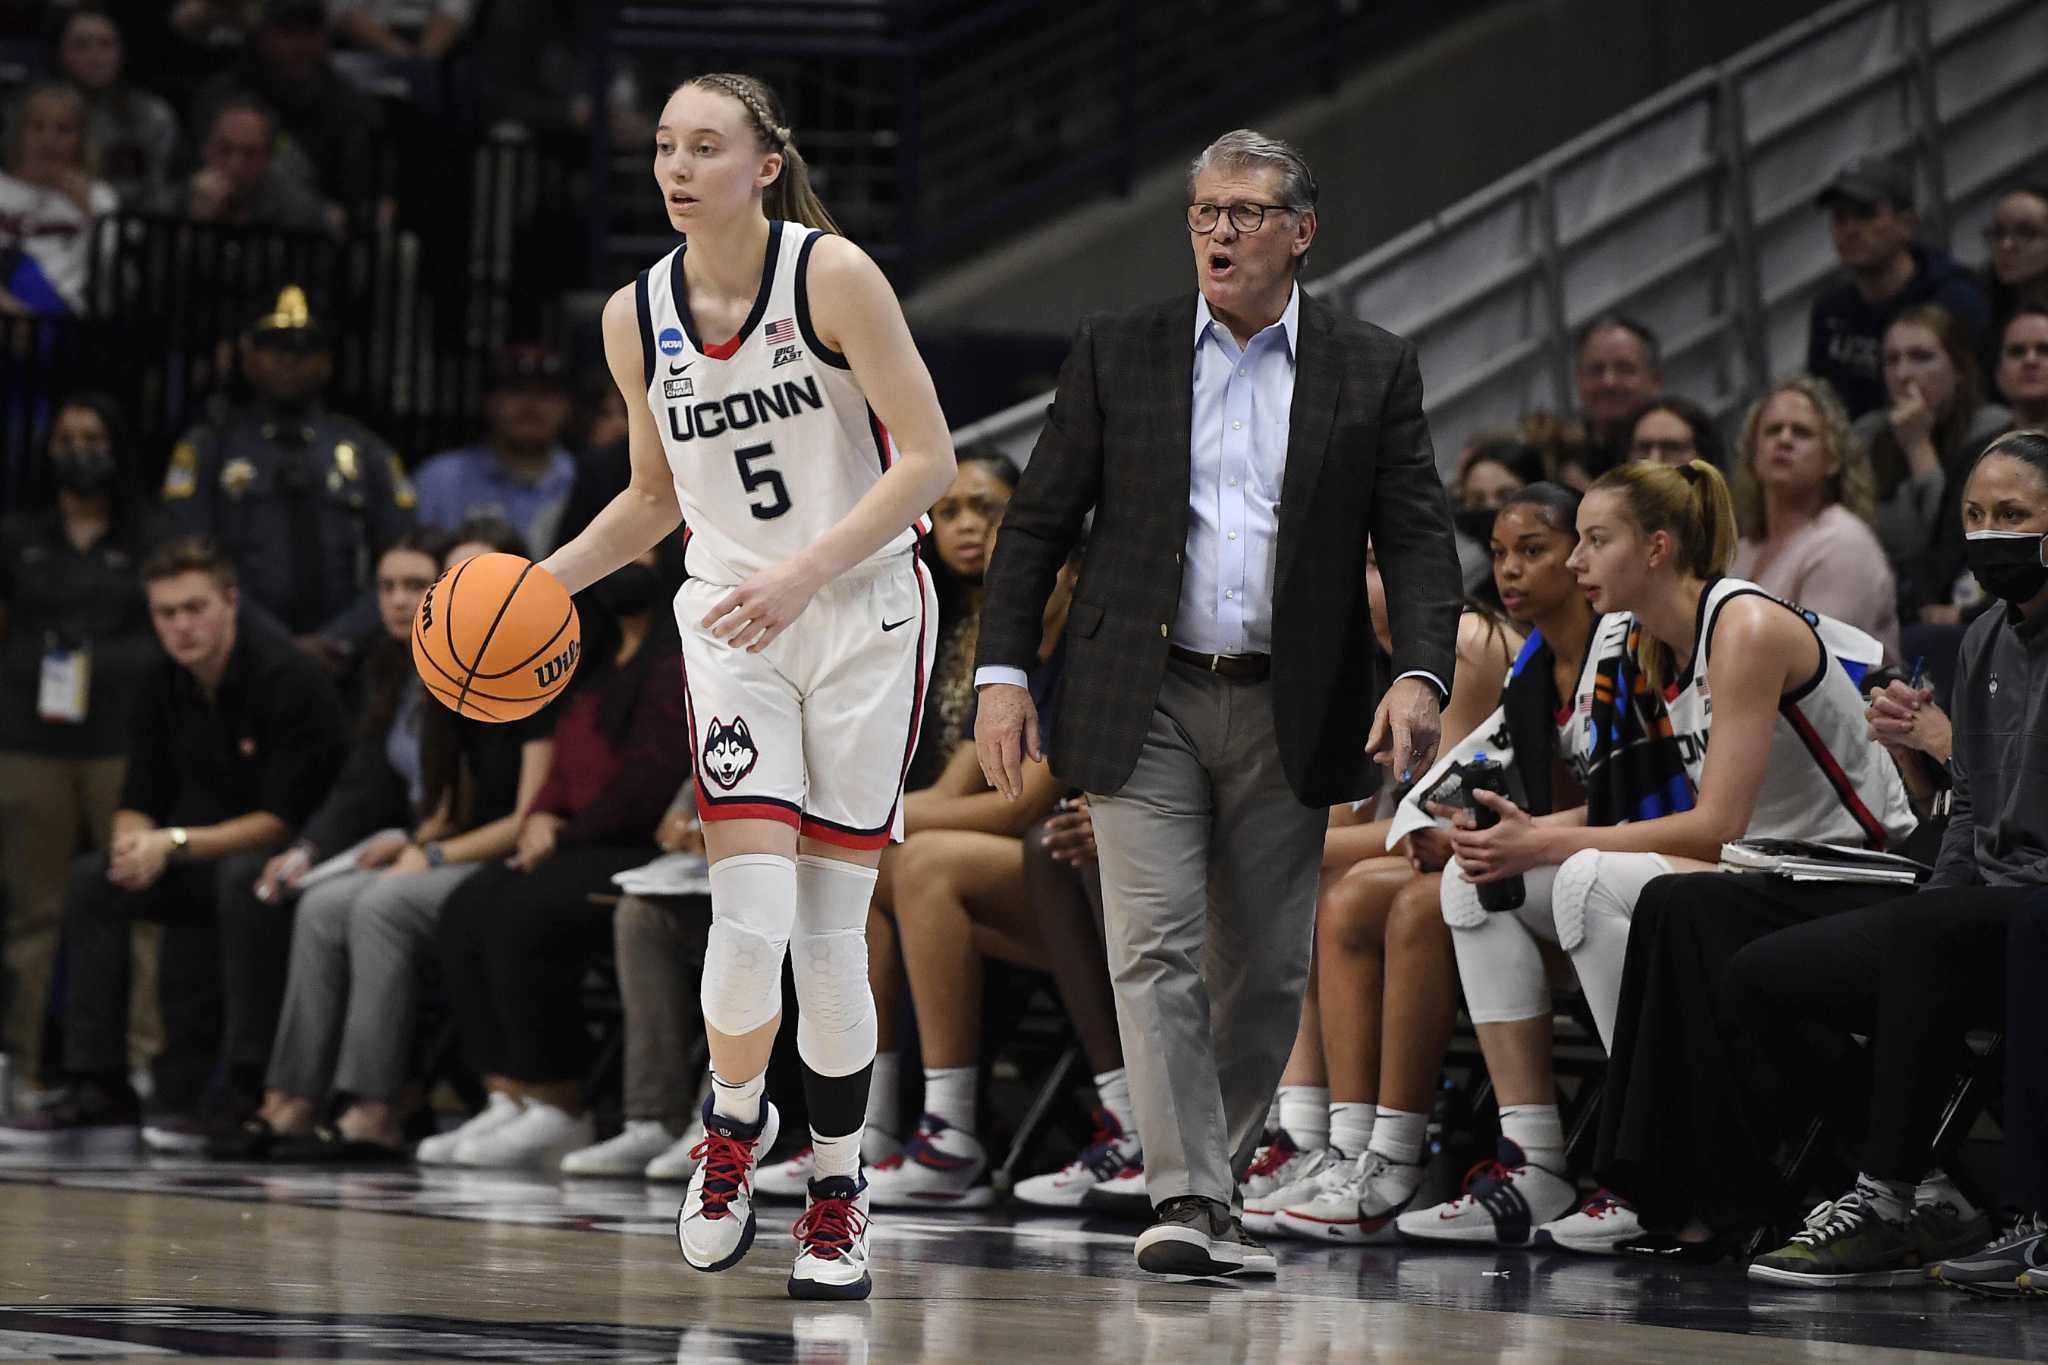 UConn women’s basketball team to face Florida State in Basketball Hall